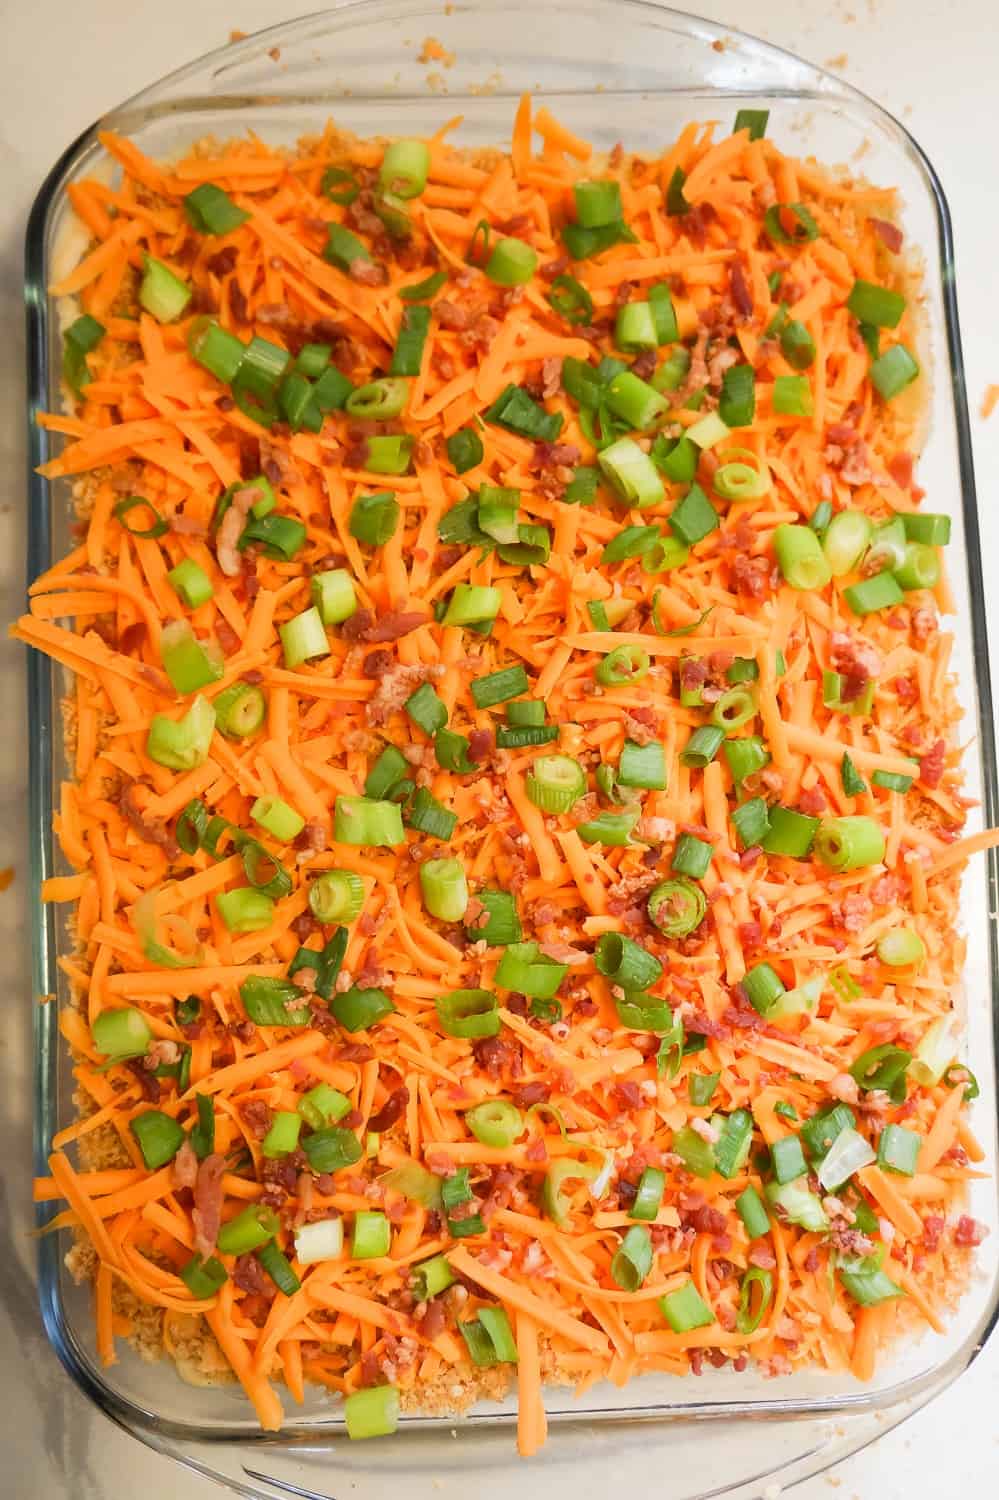 shredded cheddar cheese, chopped green onions and bacon bits on top of a mashed potato casserole